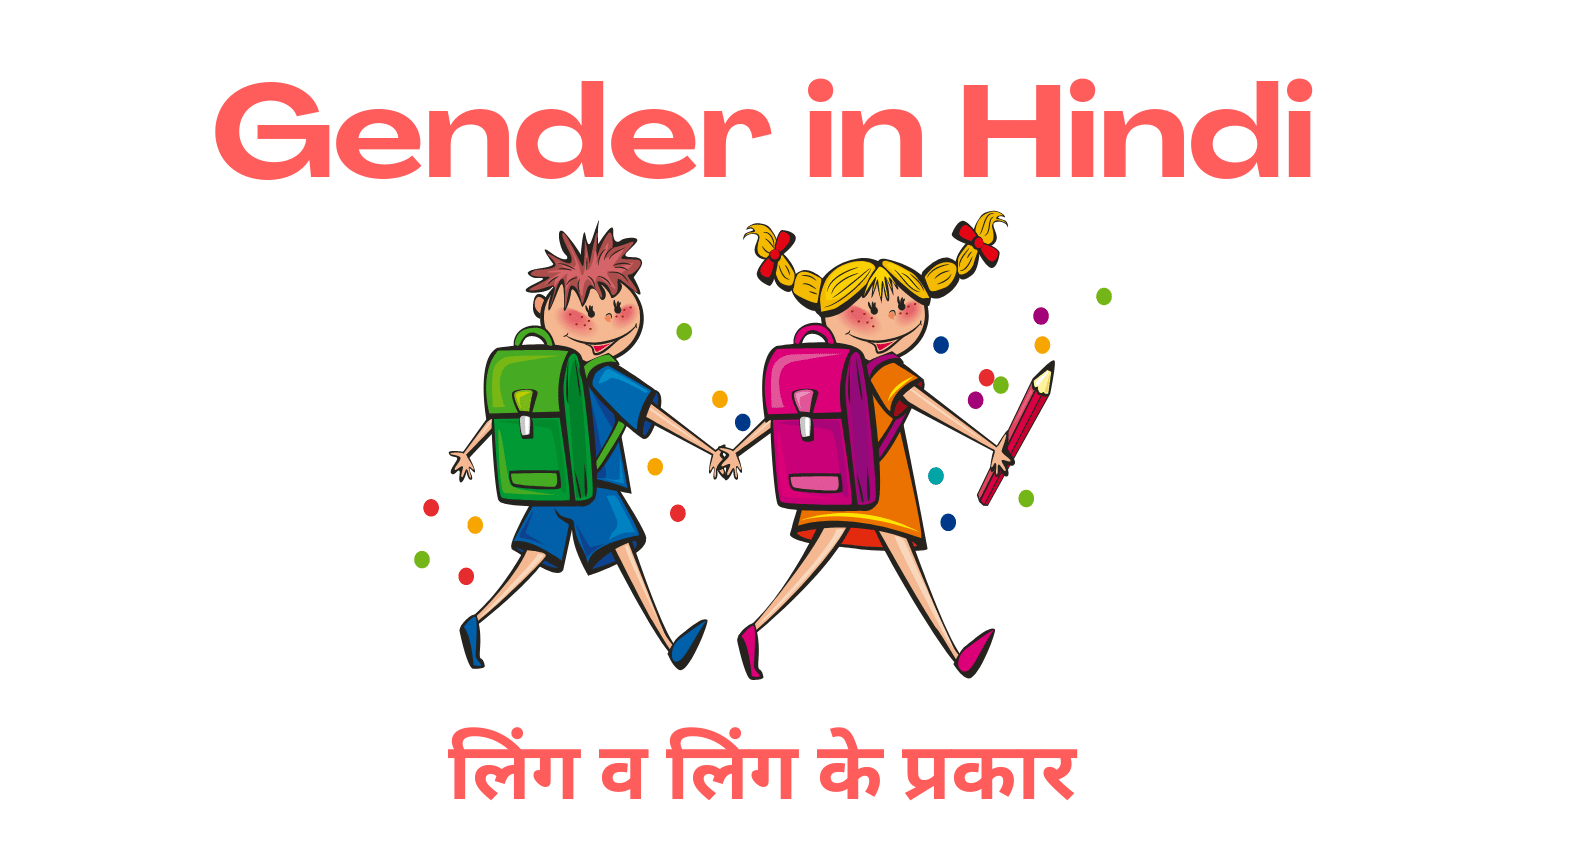 Gender in Hindi - Meaning and Kinds of Genders with Examples